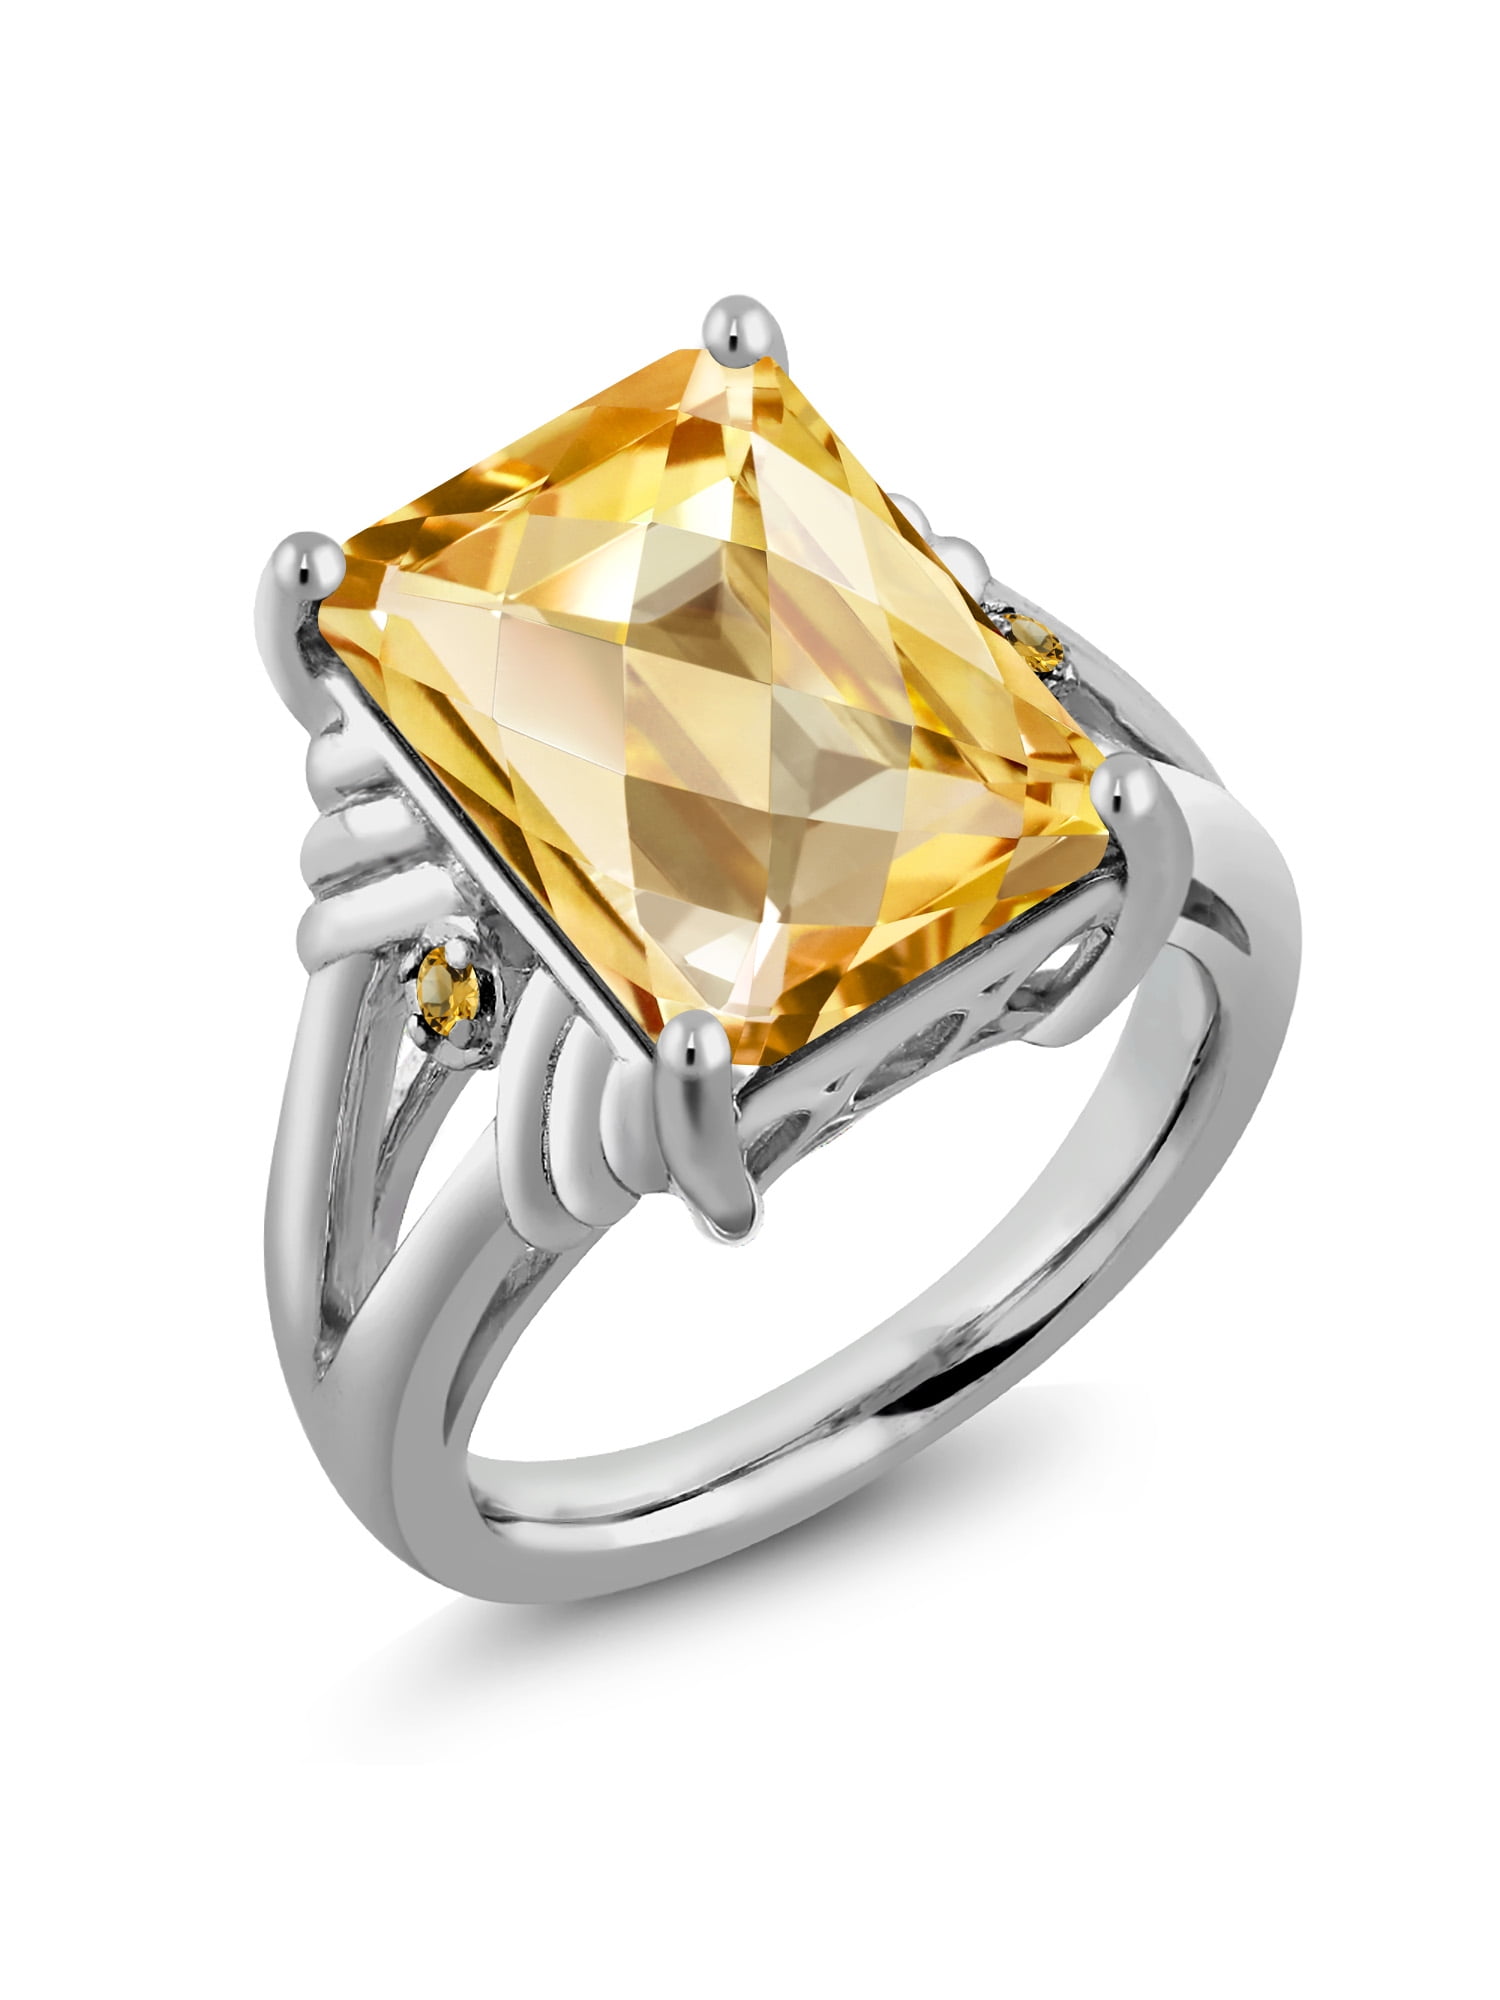 Yellow Gold Plated 925 Sterling Silver Checkerboard Cut Citrine Gemstone Ring 